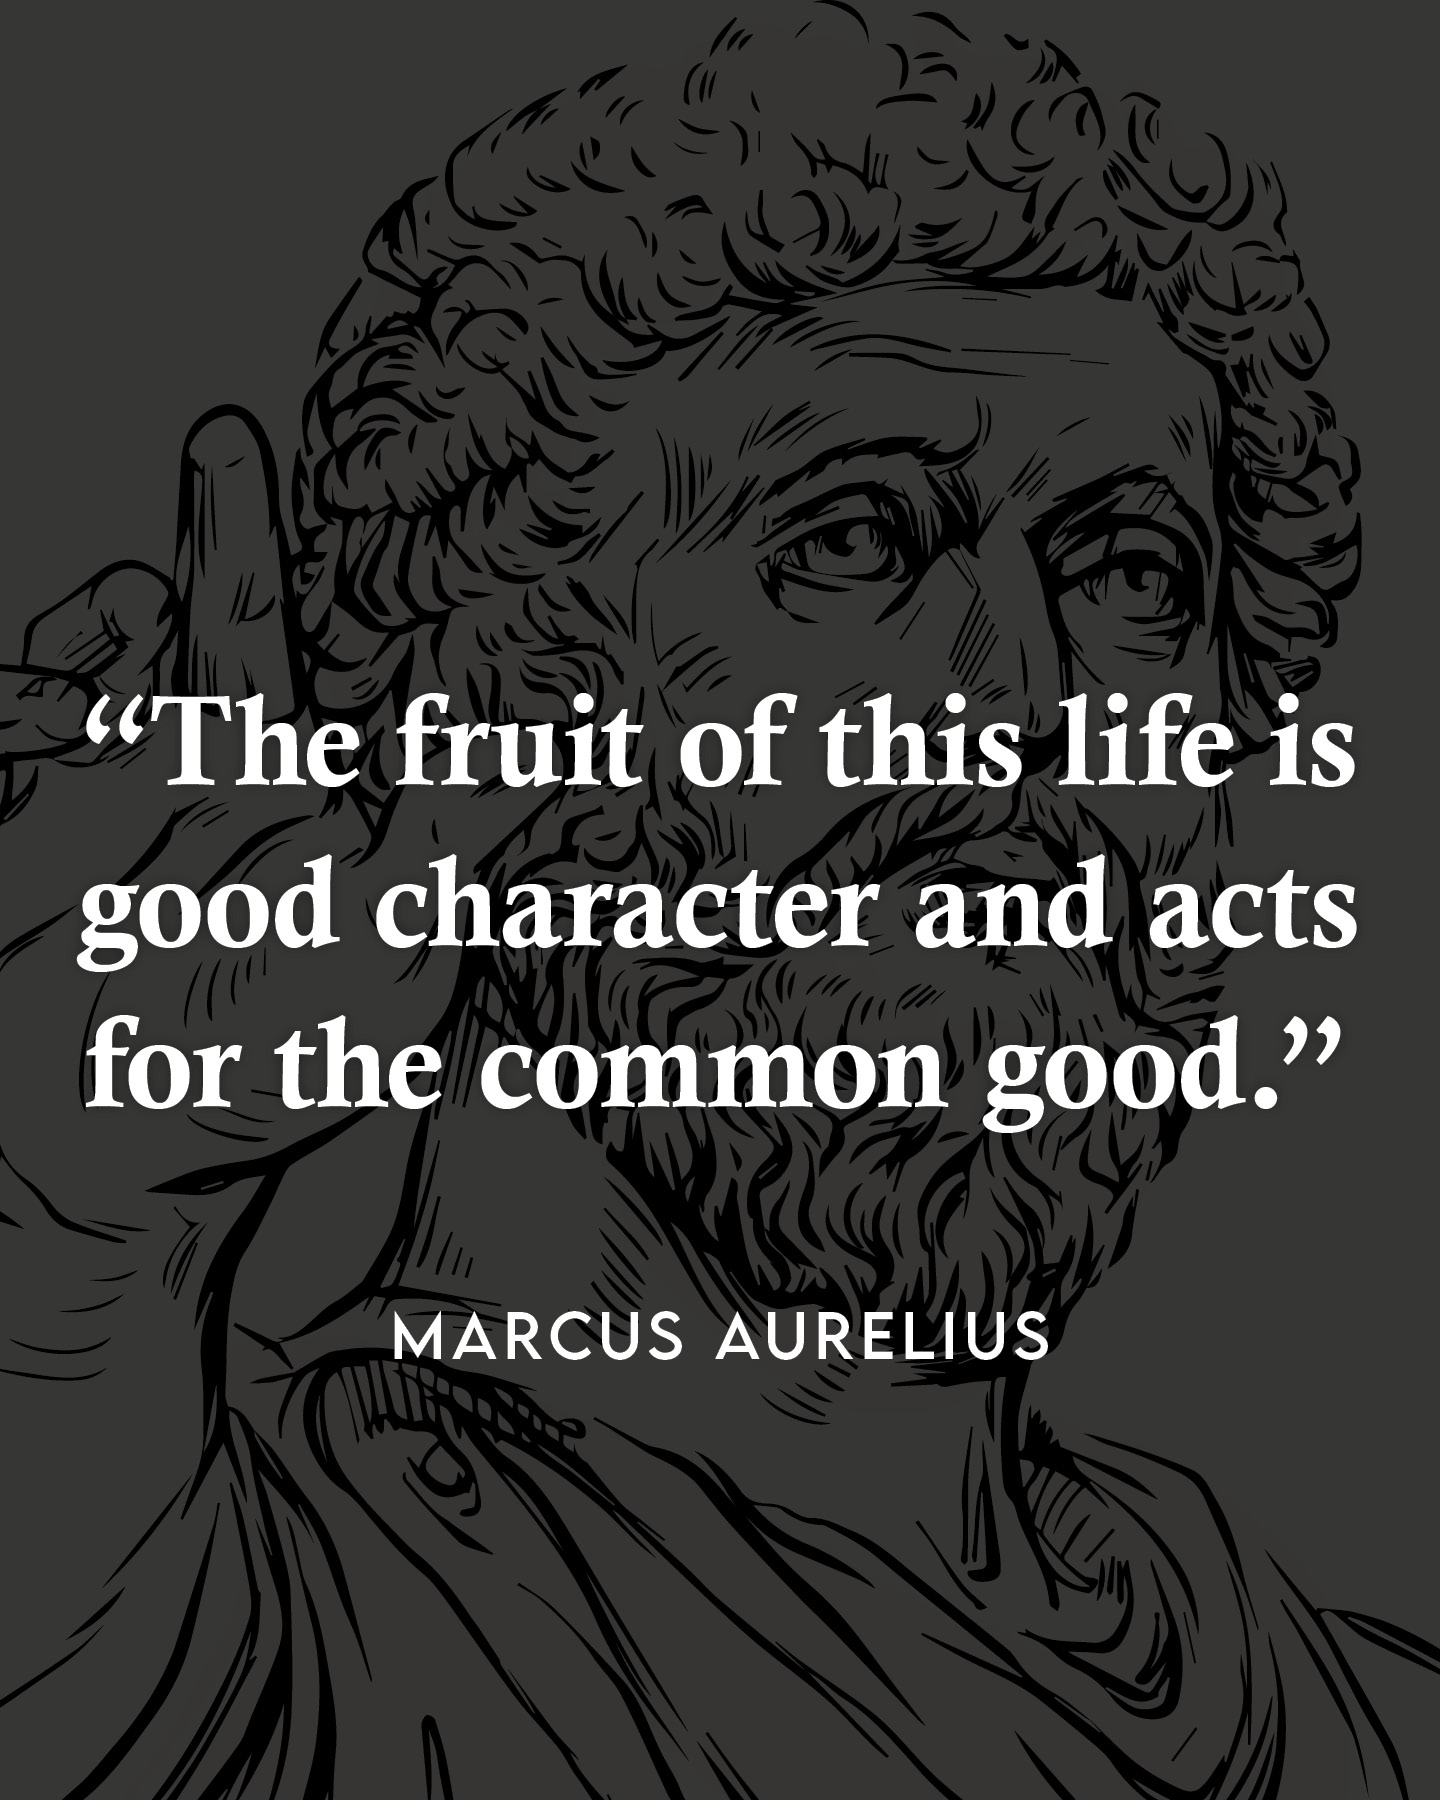 The fruit of this life is a good character and acts for the common good.